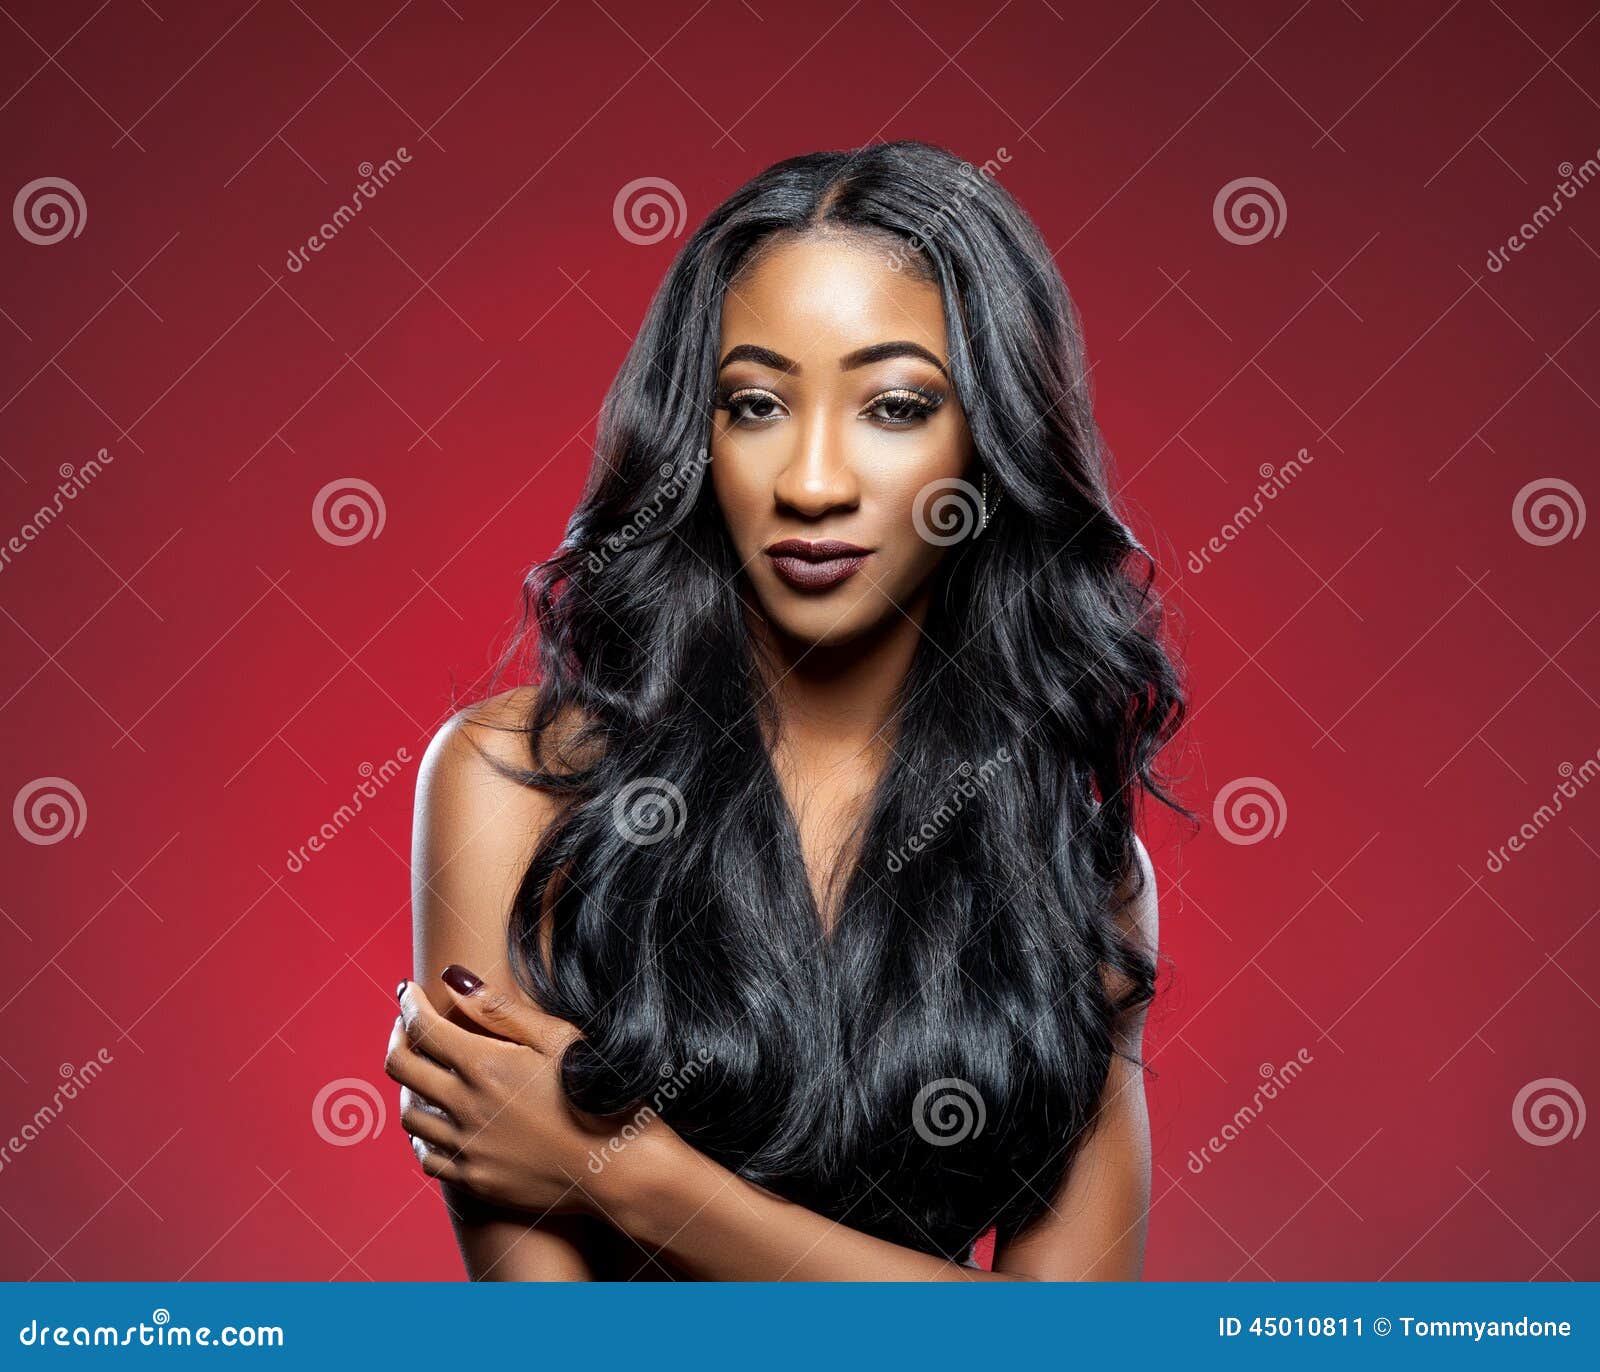 black woman with long luxurious shiny hair